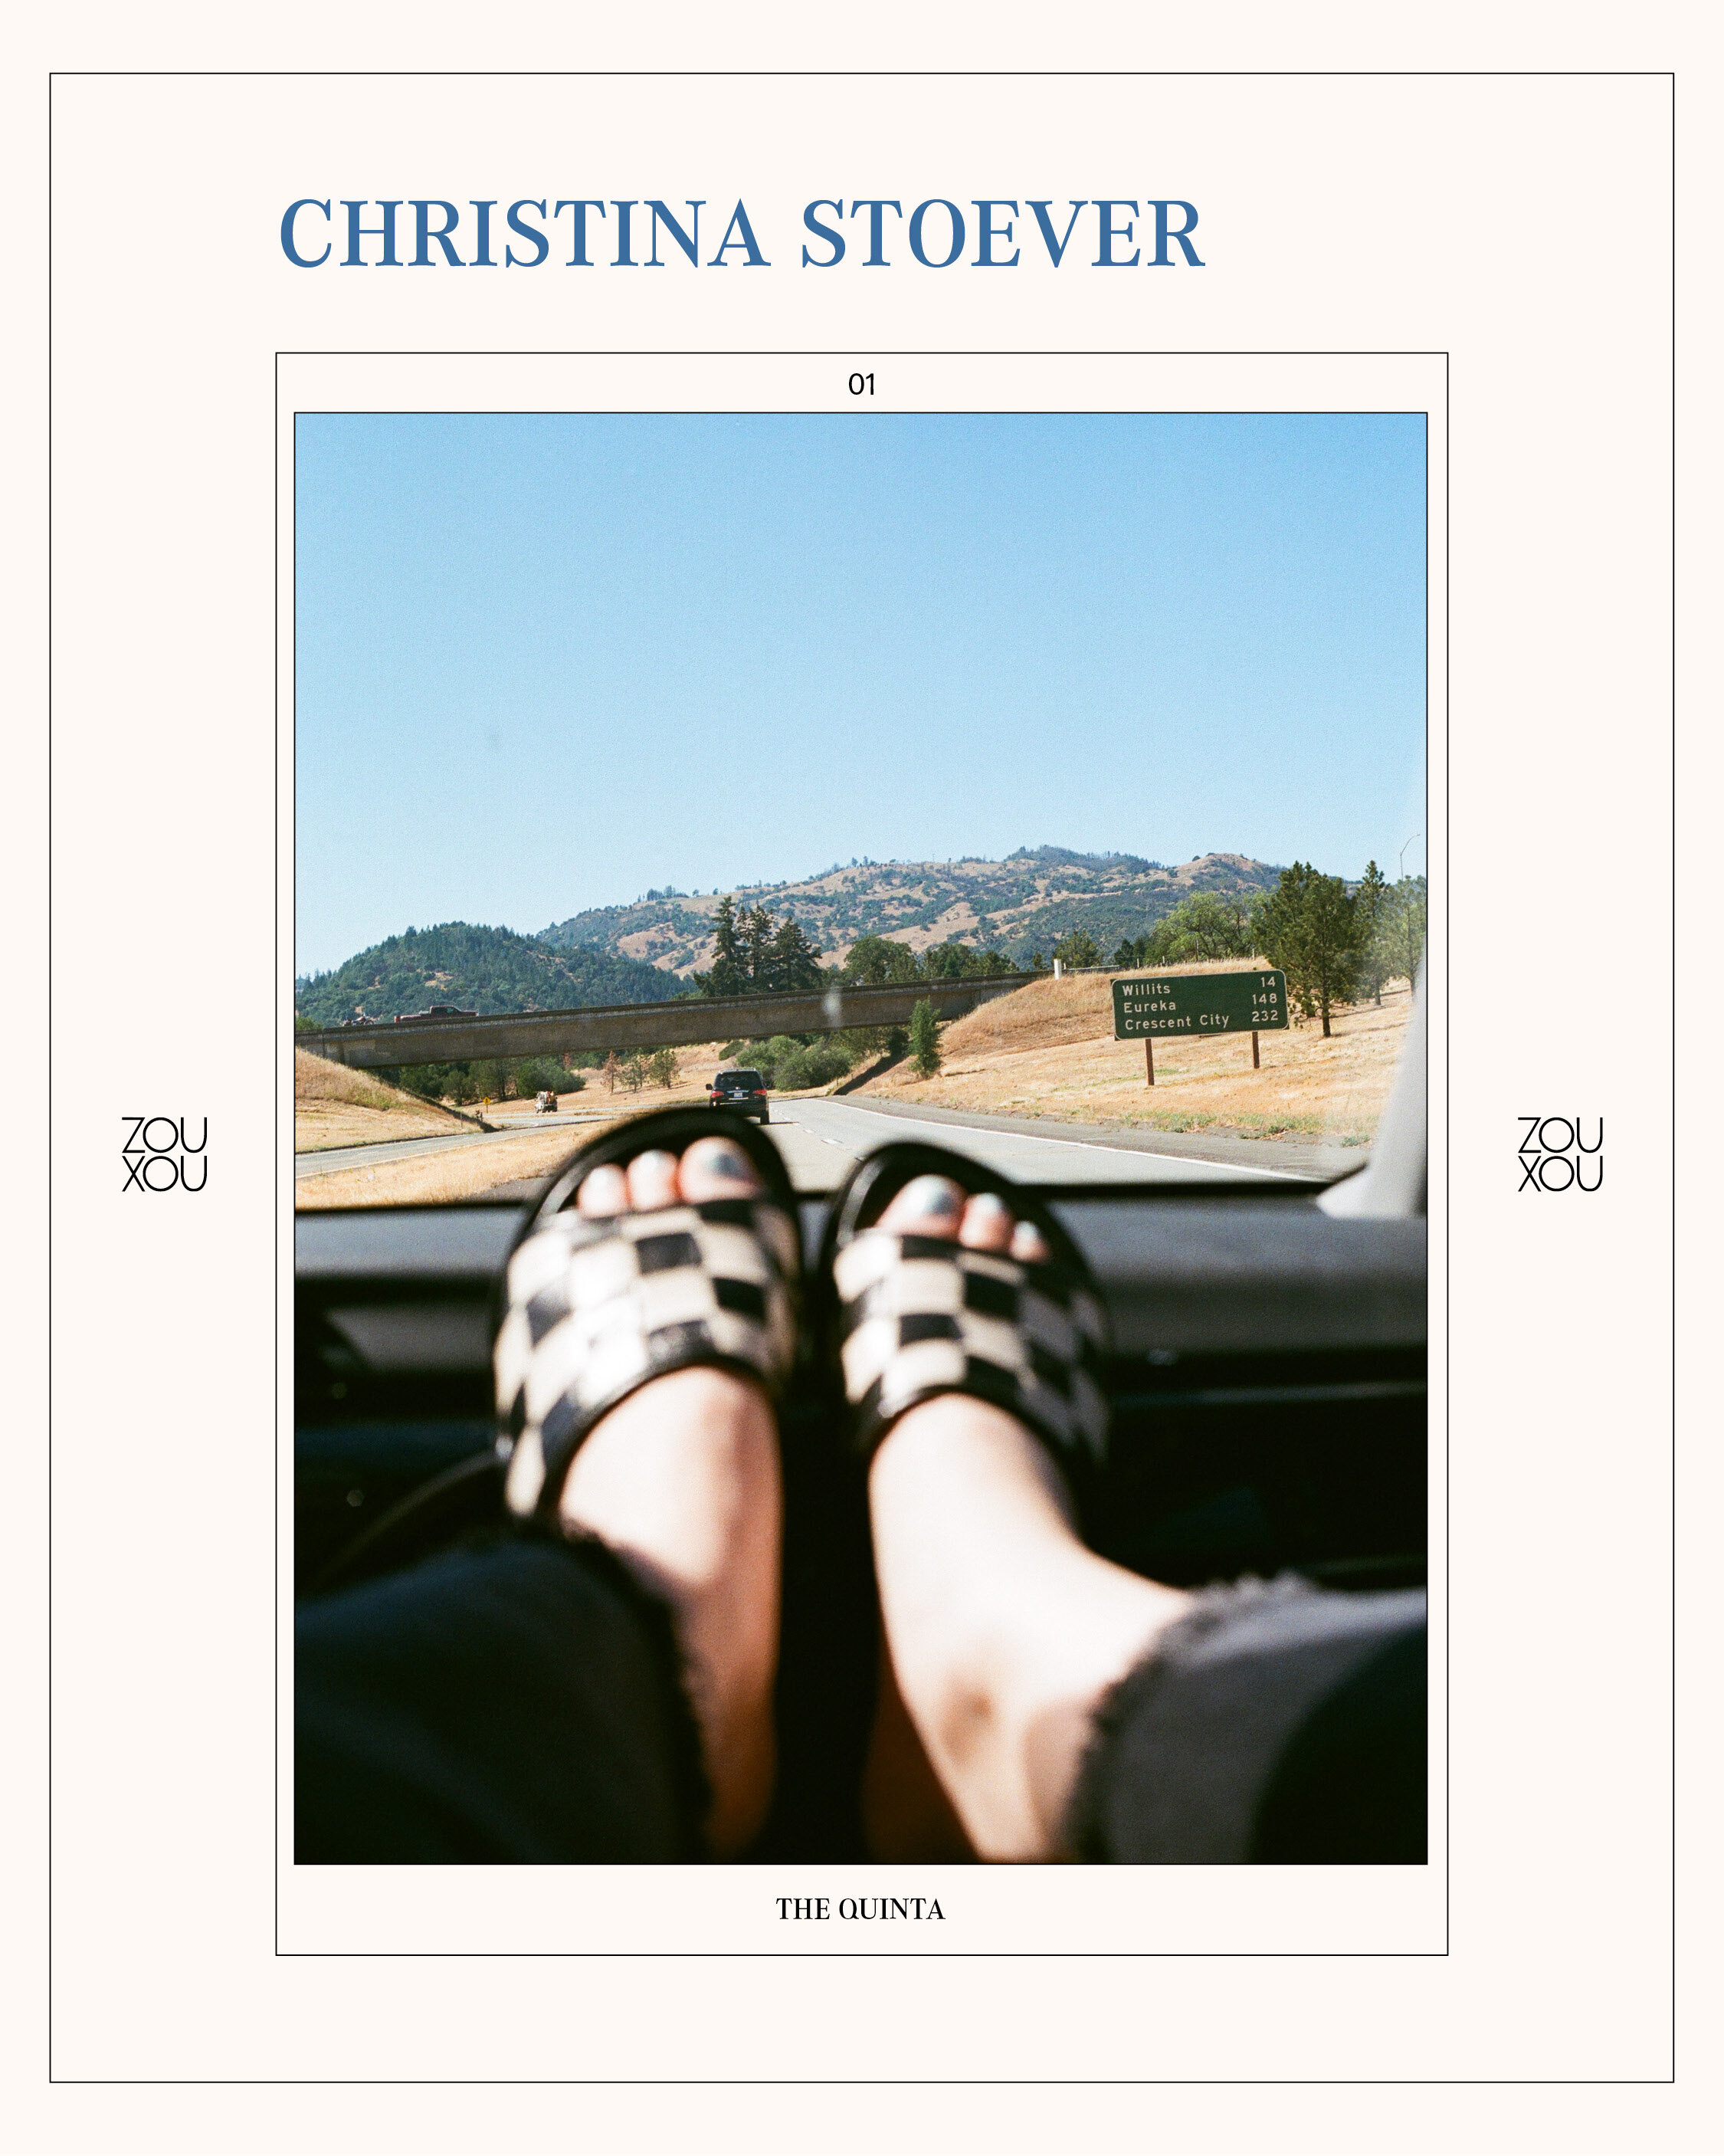 SLOW DOWN WITH CHRISTINA STOEVER IMAGE 4.jpg